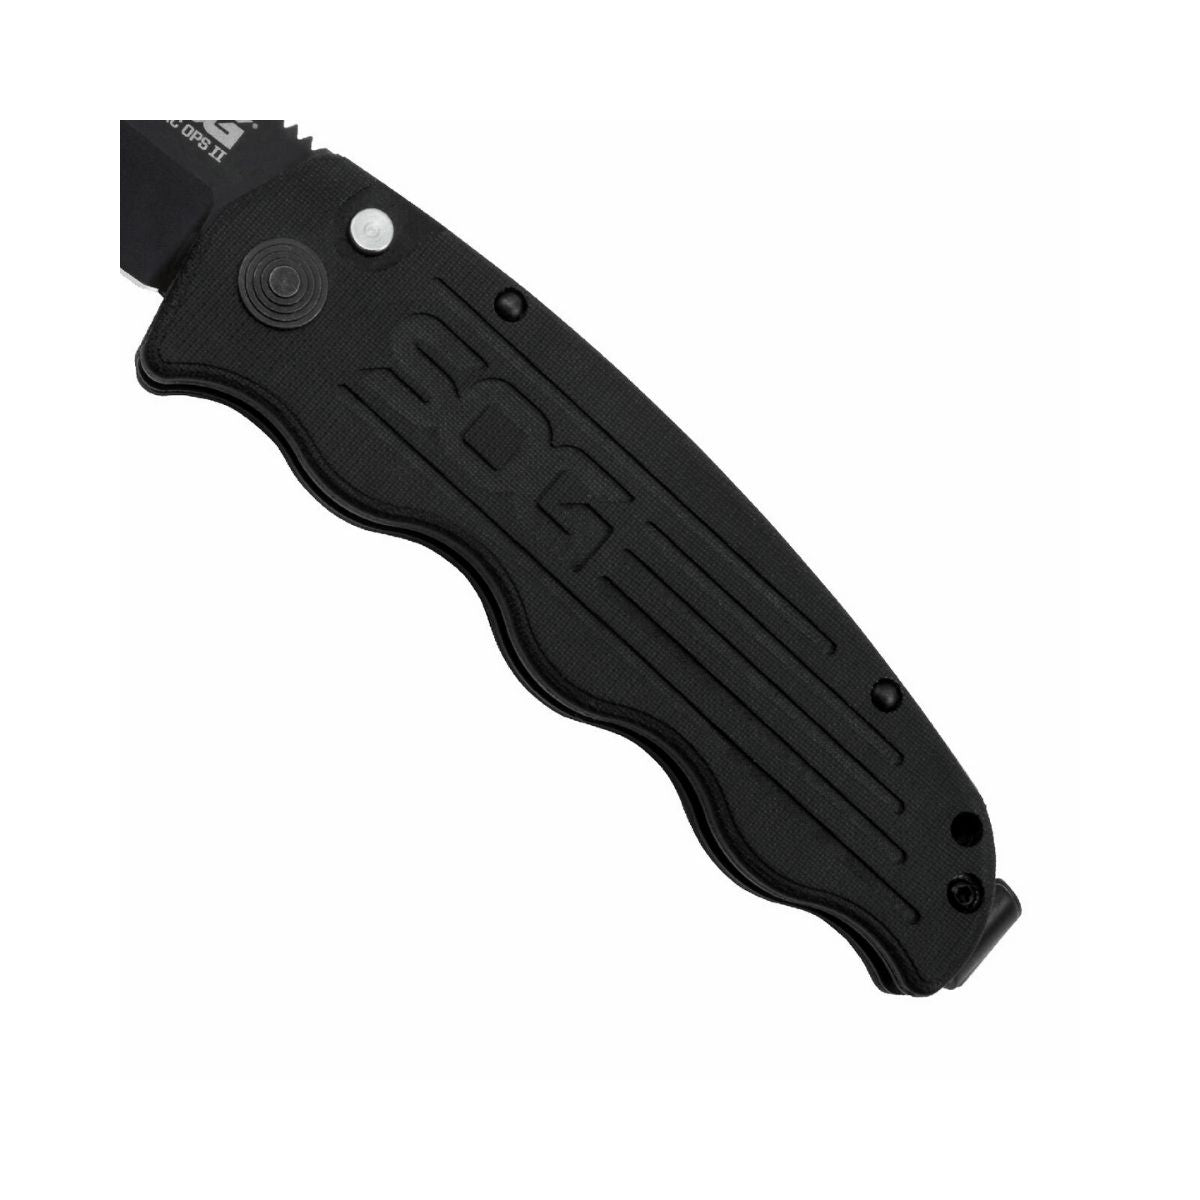 SOG TAC-OPS Auto 3.5" Black TiNi S35VN Blade TO1011-BX - Outdoor Travel Gear 4